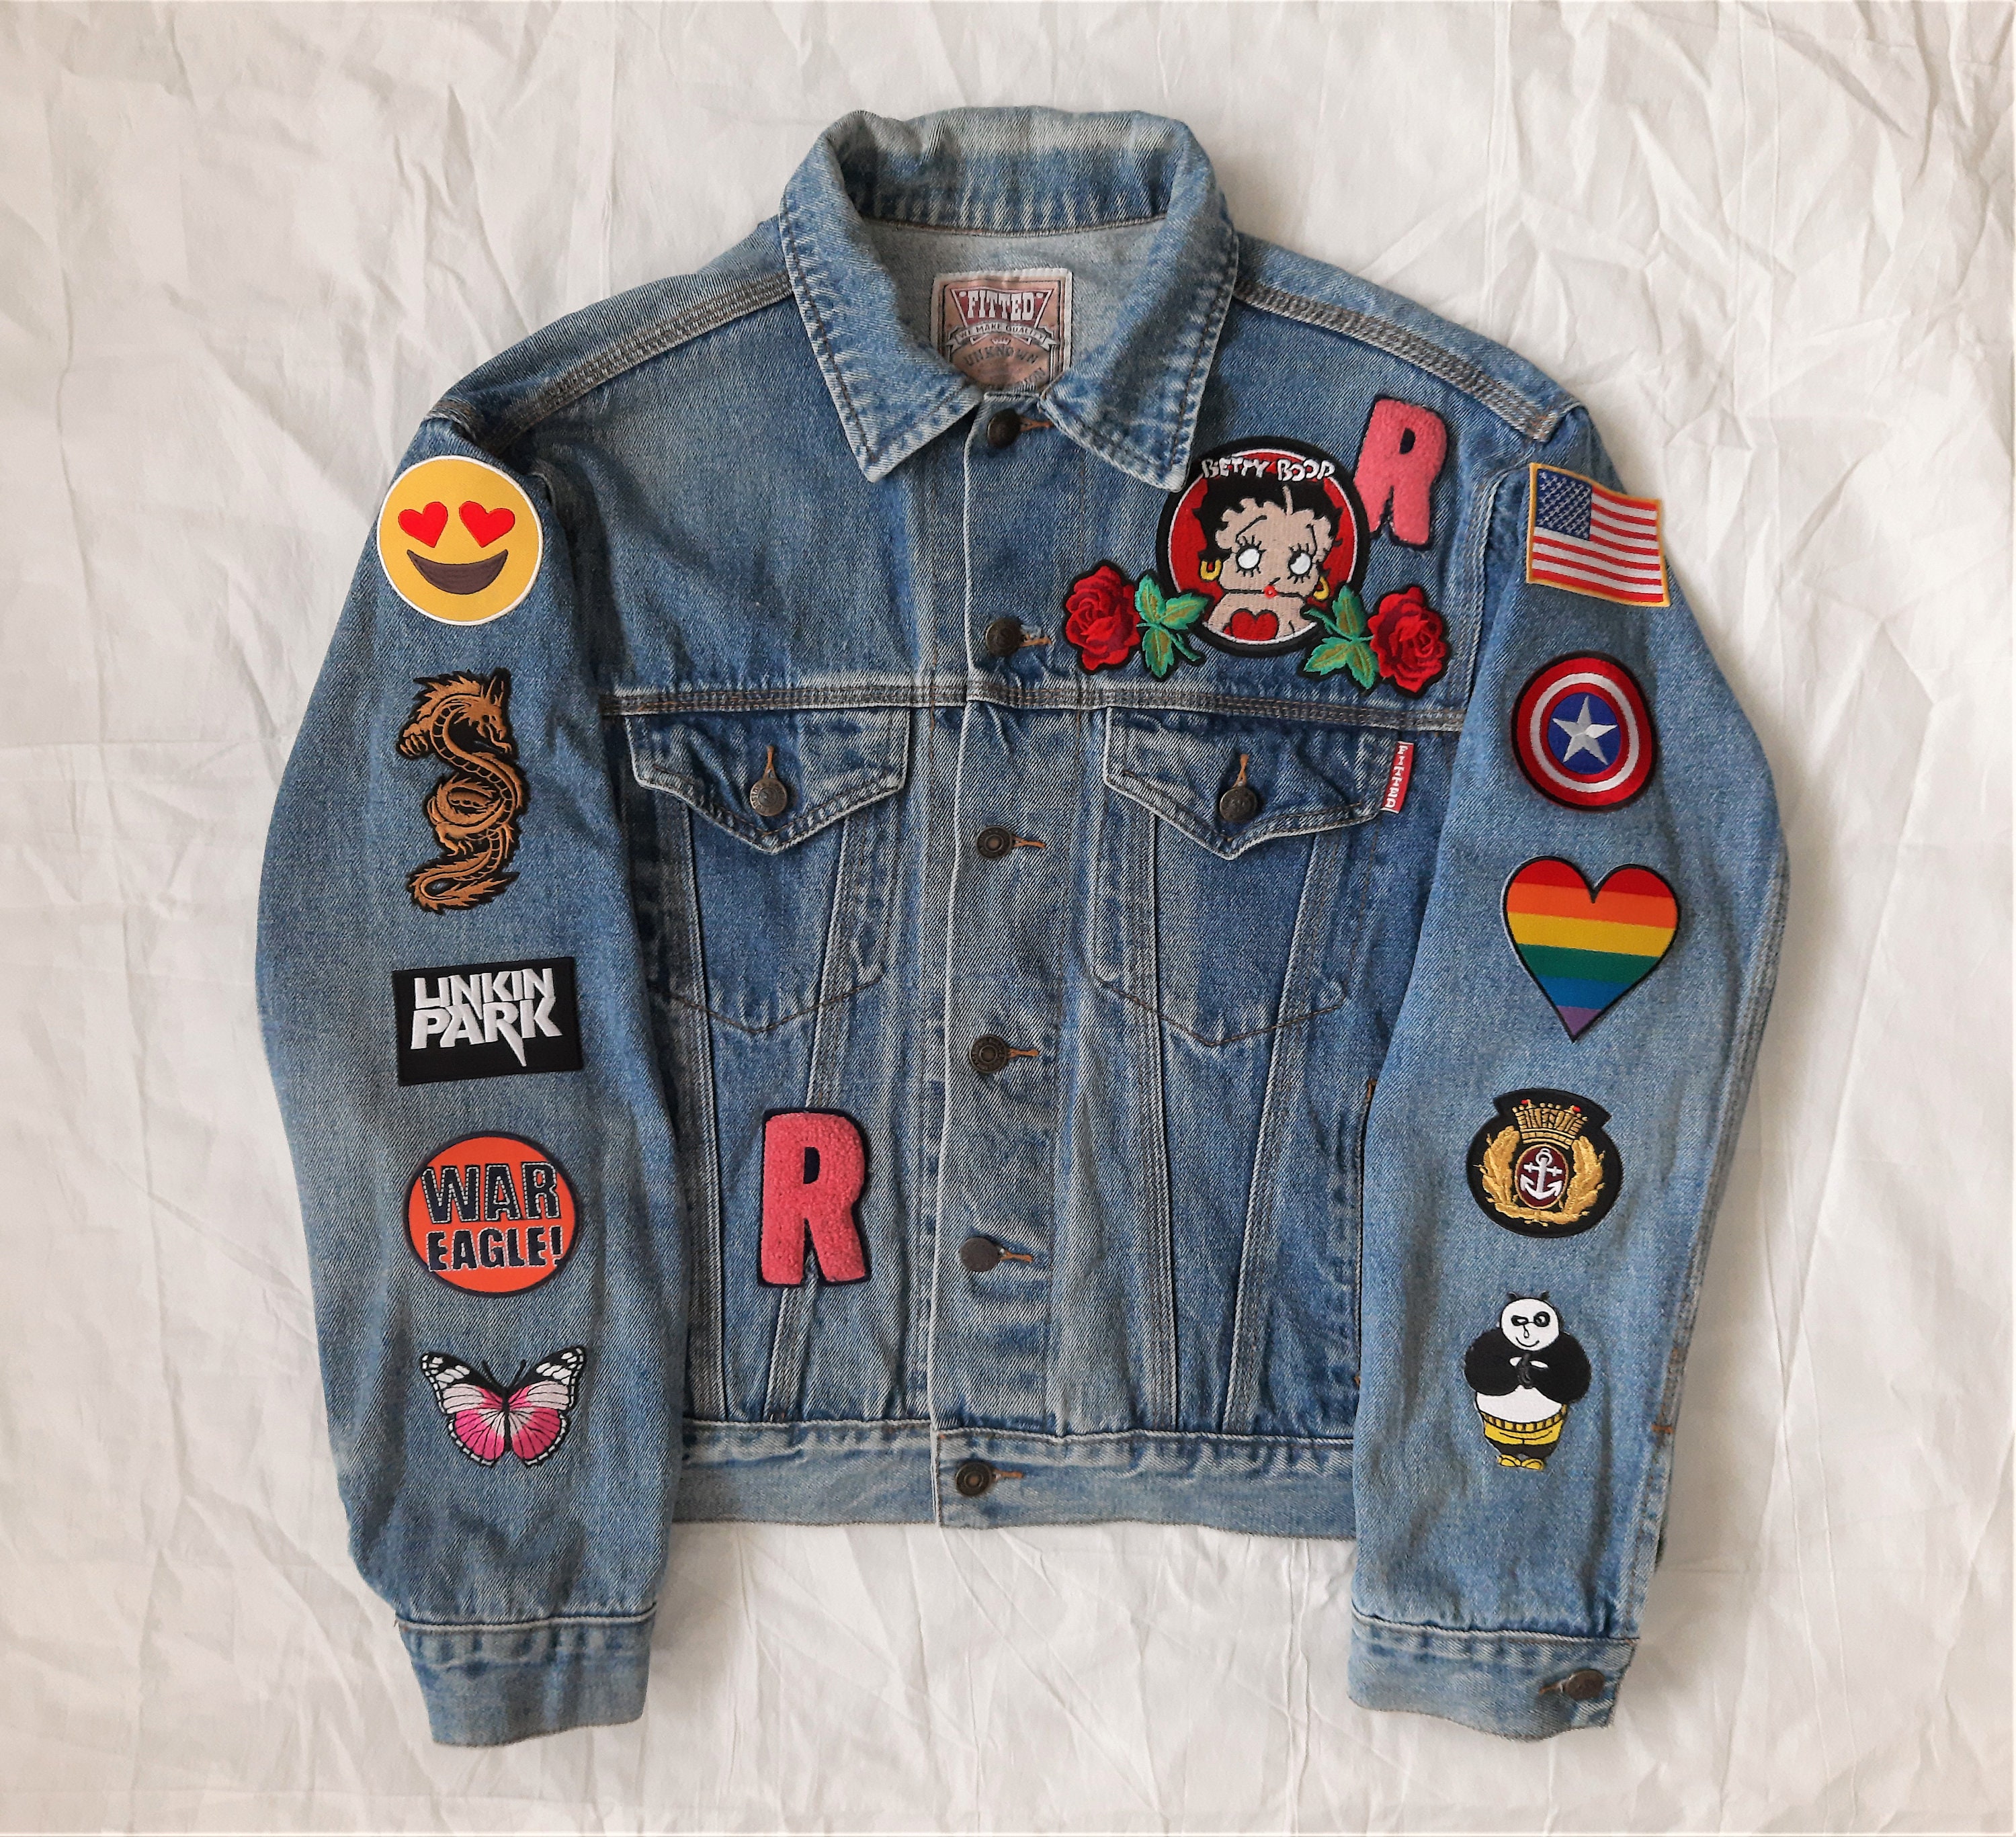 Upcycled Jean Jacket With Patches / Reworked Vintage Jean | Etsy